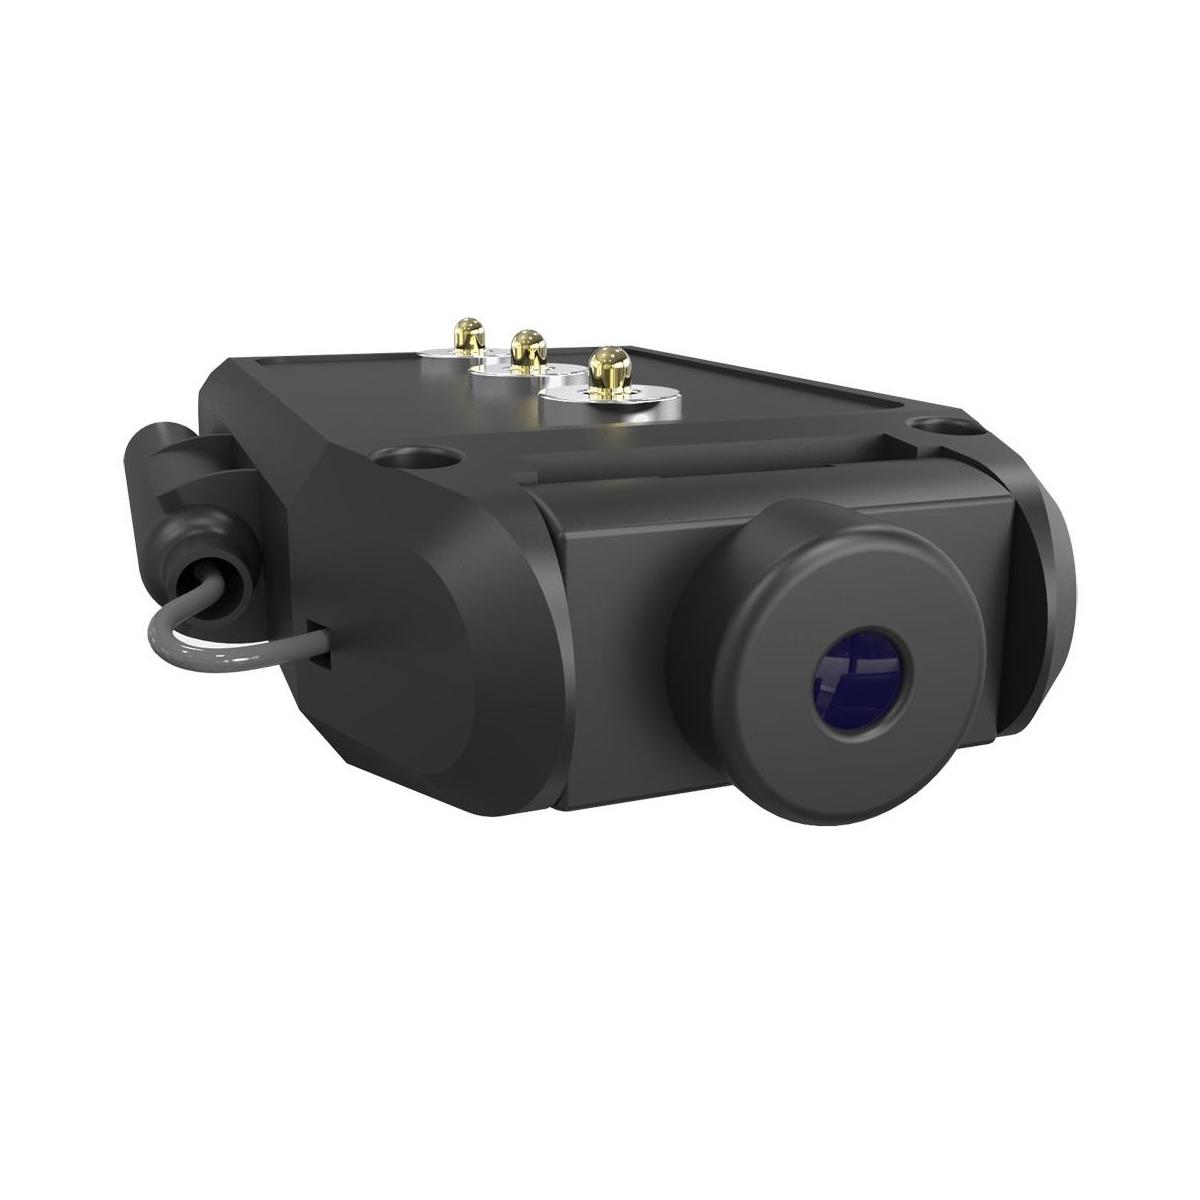 Image of Extreme Fliers 720p HD Wi-Fi Camera Module for Micro Drone 3.0